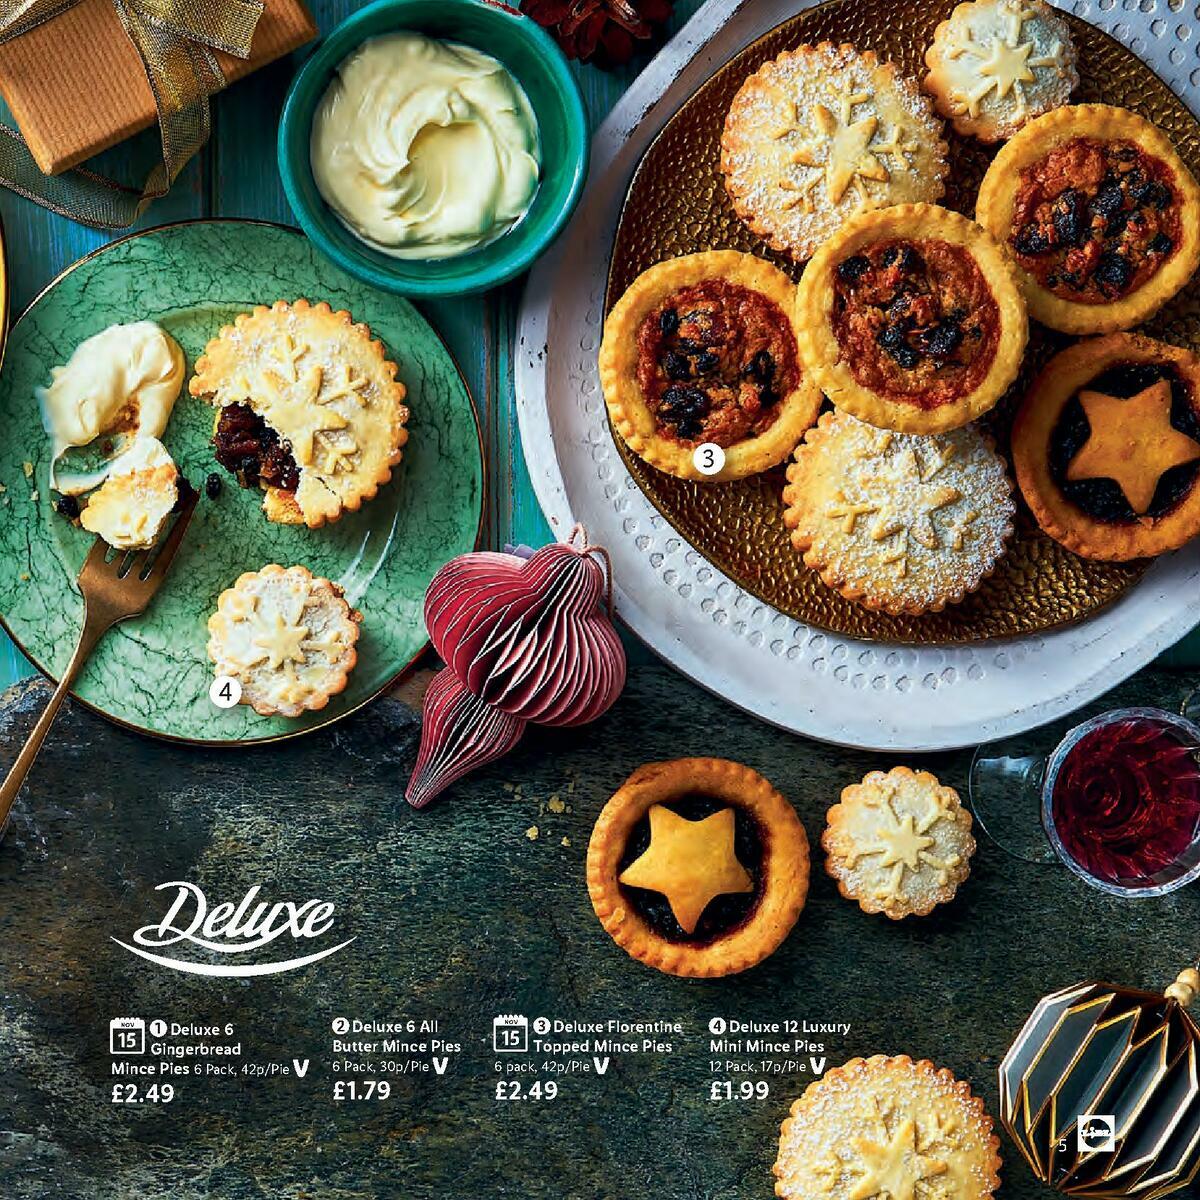 LIDL Christmas Magazine England Offers from 10 November